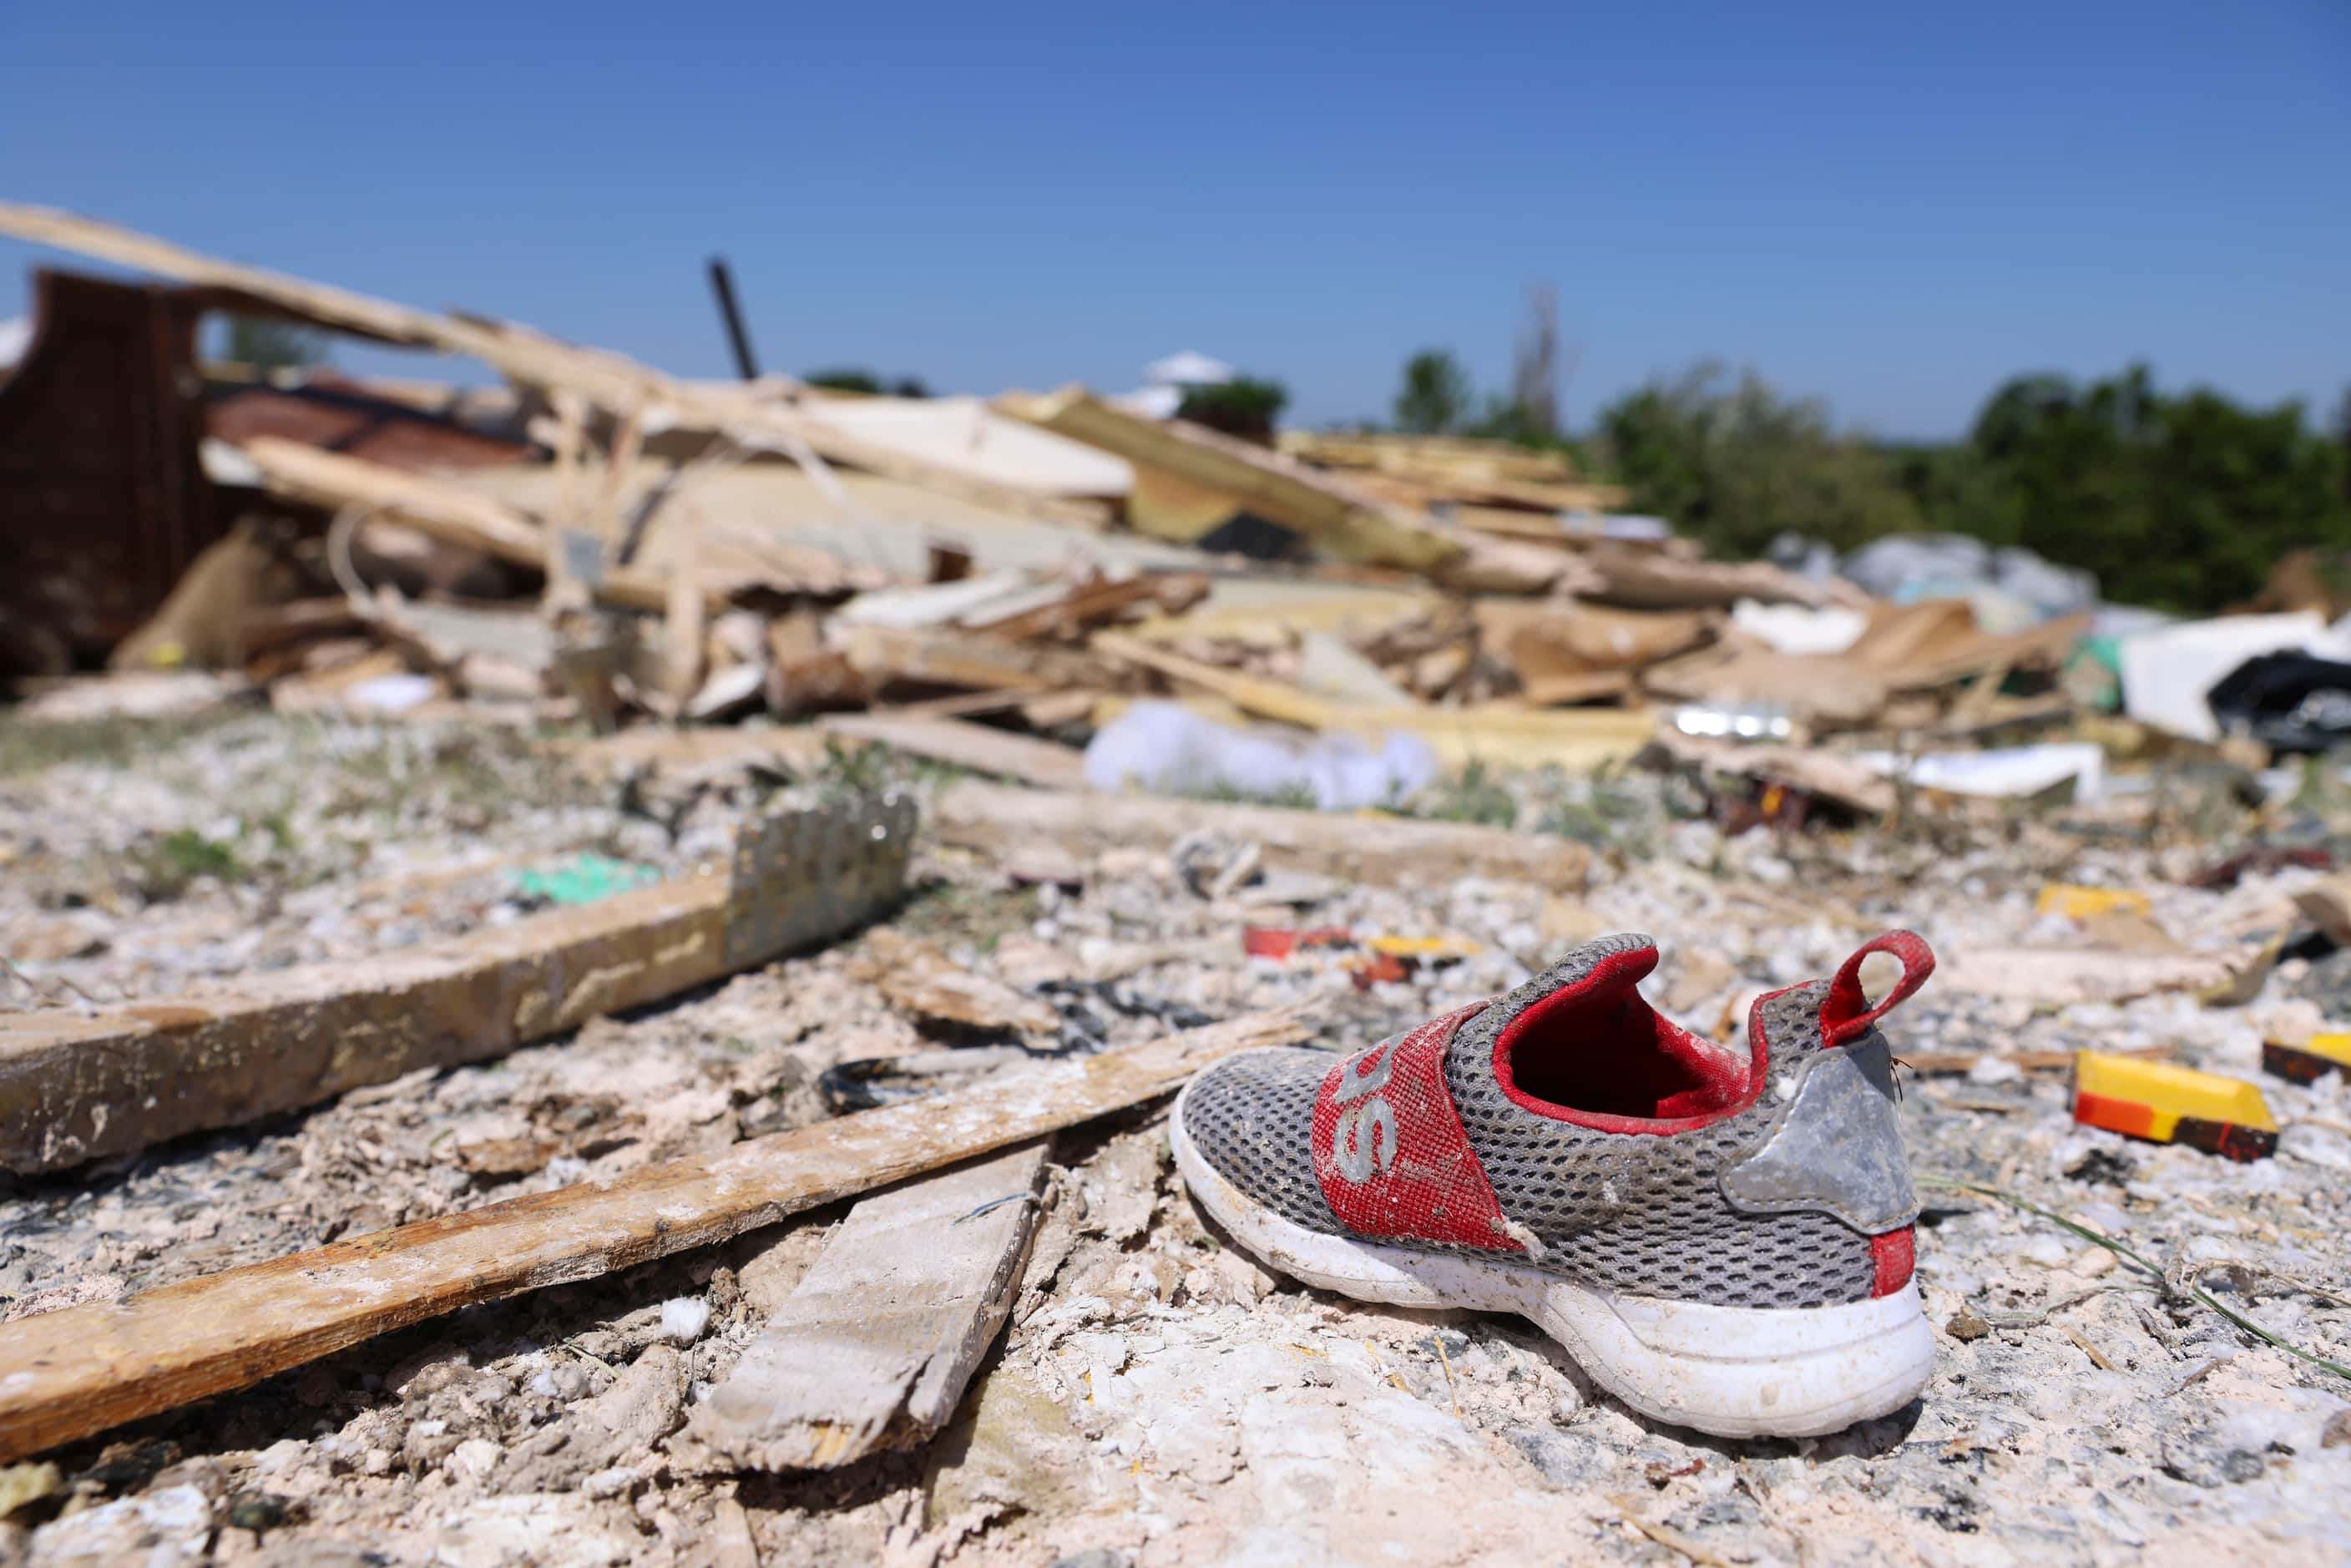 A single kid sized shoe remain within other debris collected after a tornado moved through...